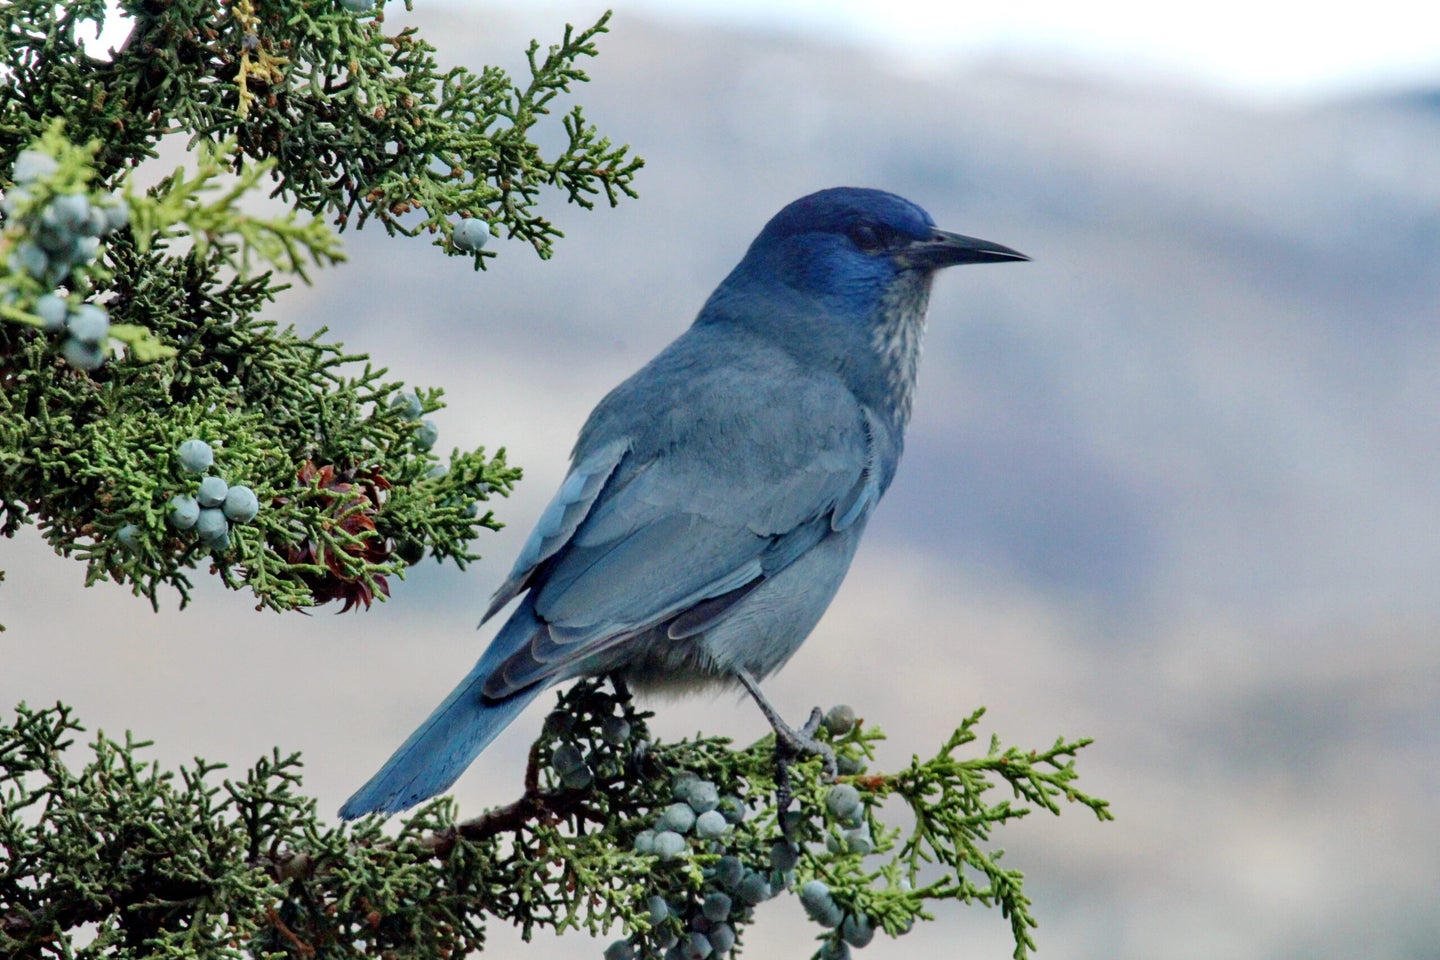 The pinyon jay is considered a keystone species.